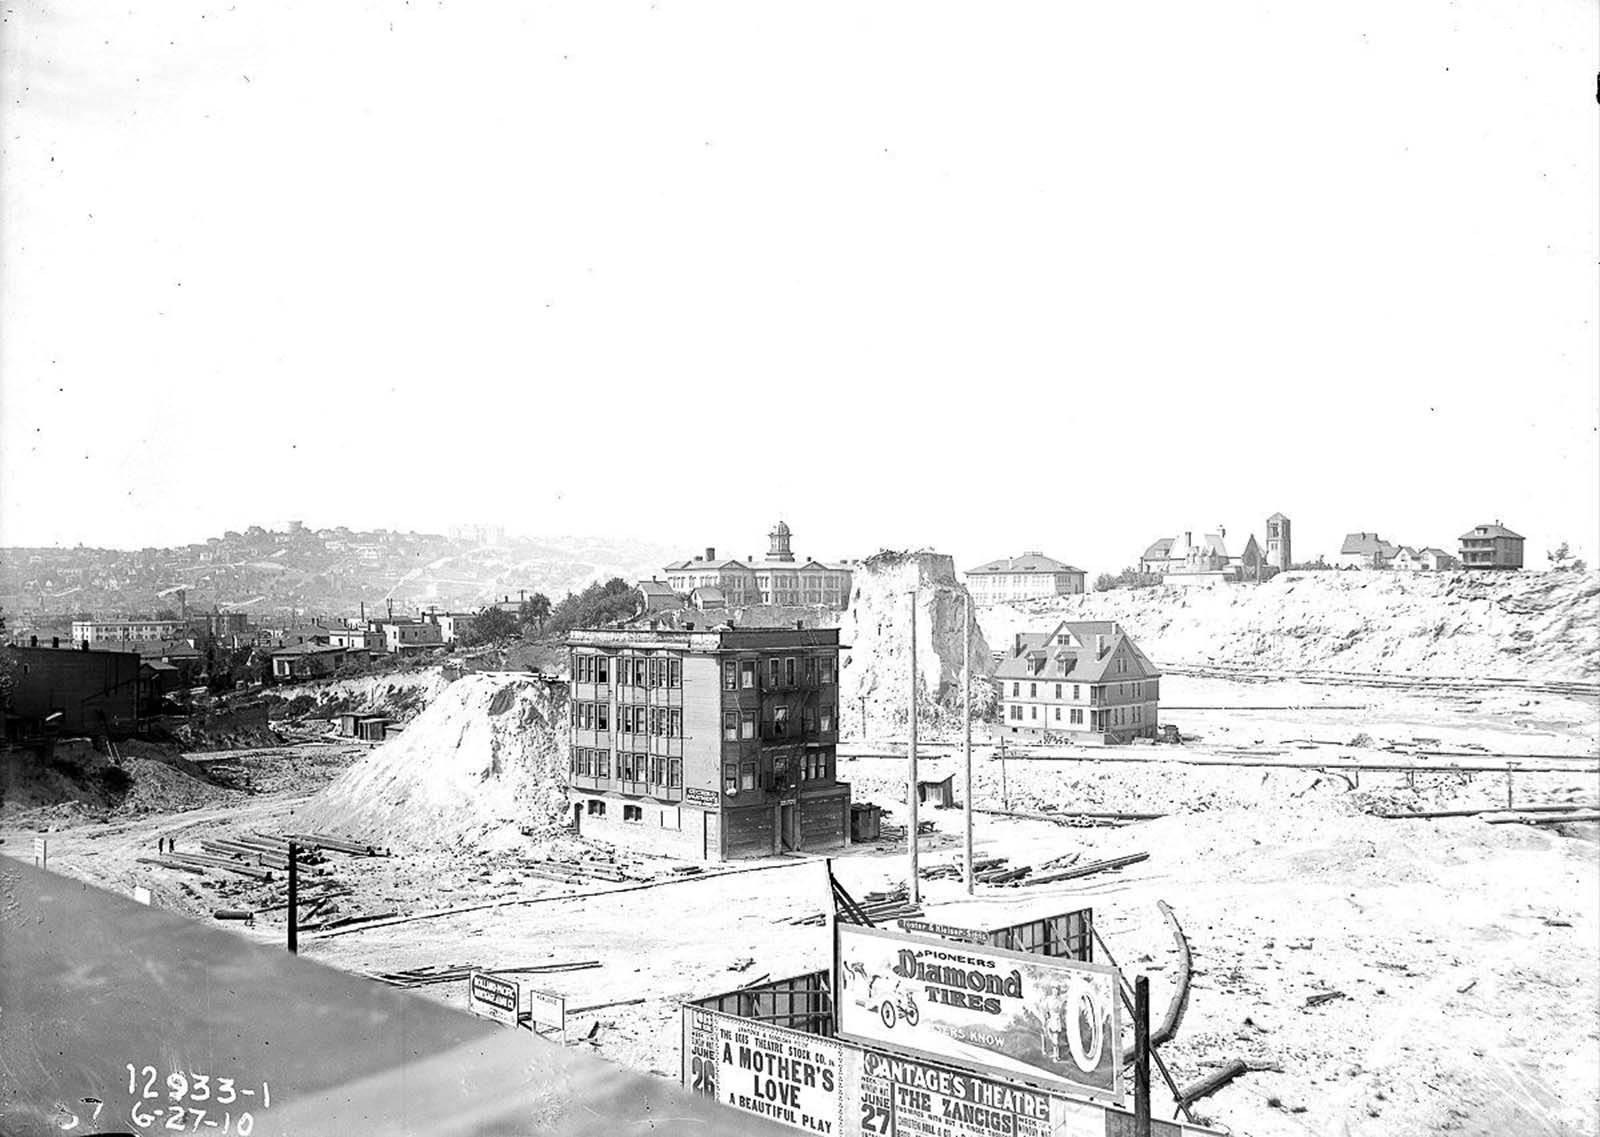 Building Seattle: Rare Historic Photos show the Construction of the city from the Early 20th Century